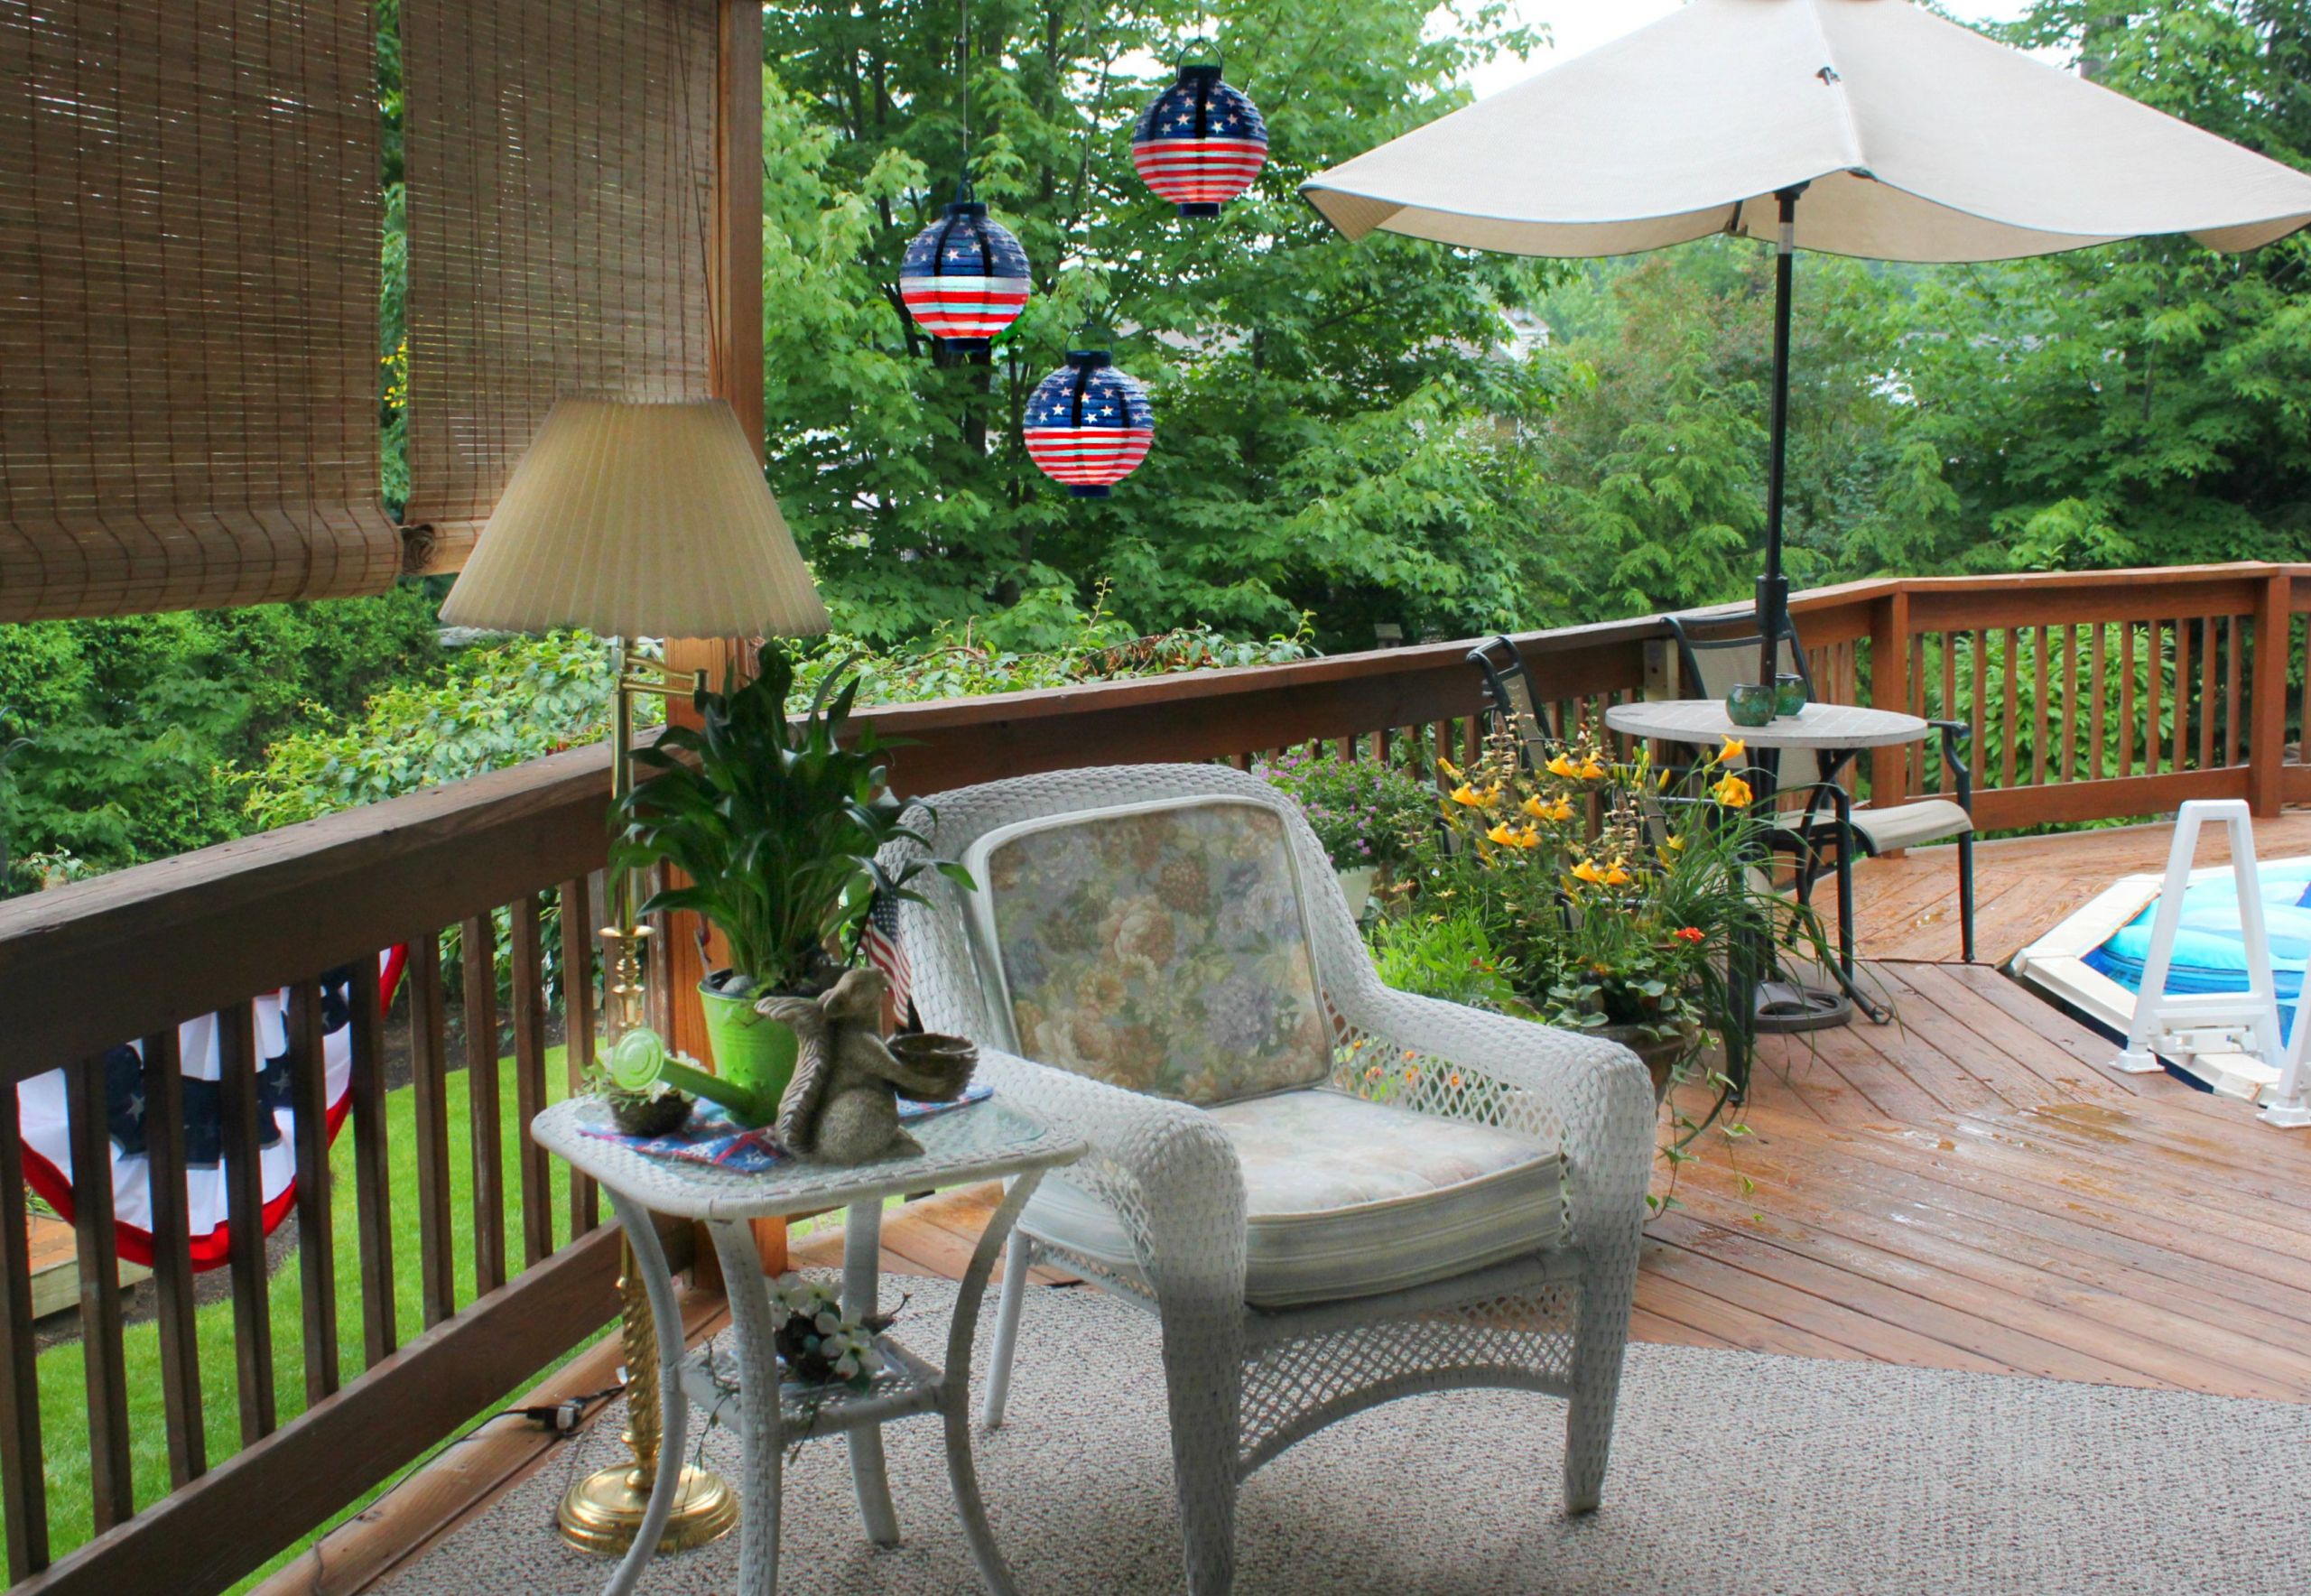 Christmas Tree Shop Patio Sets
 Patriotic Patio Decorations purchased at the Christmas